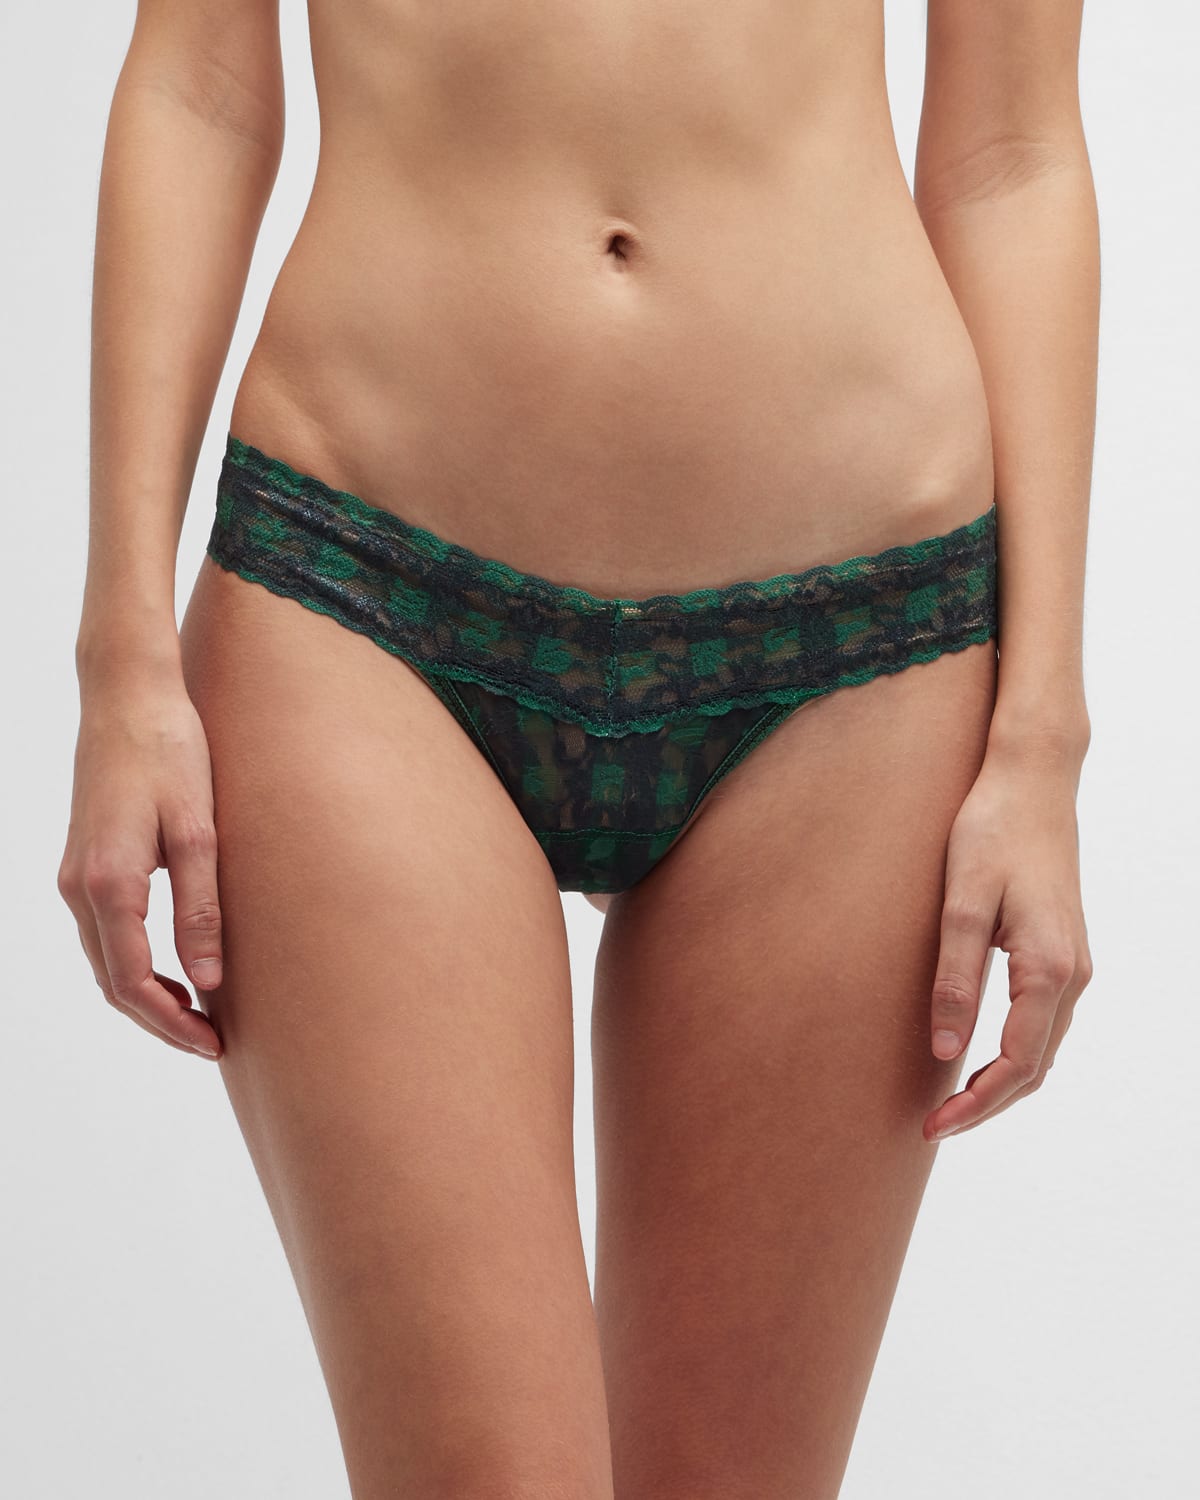 Hanky Panky Printed Low-Rise Signature Lace Thong